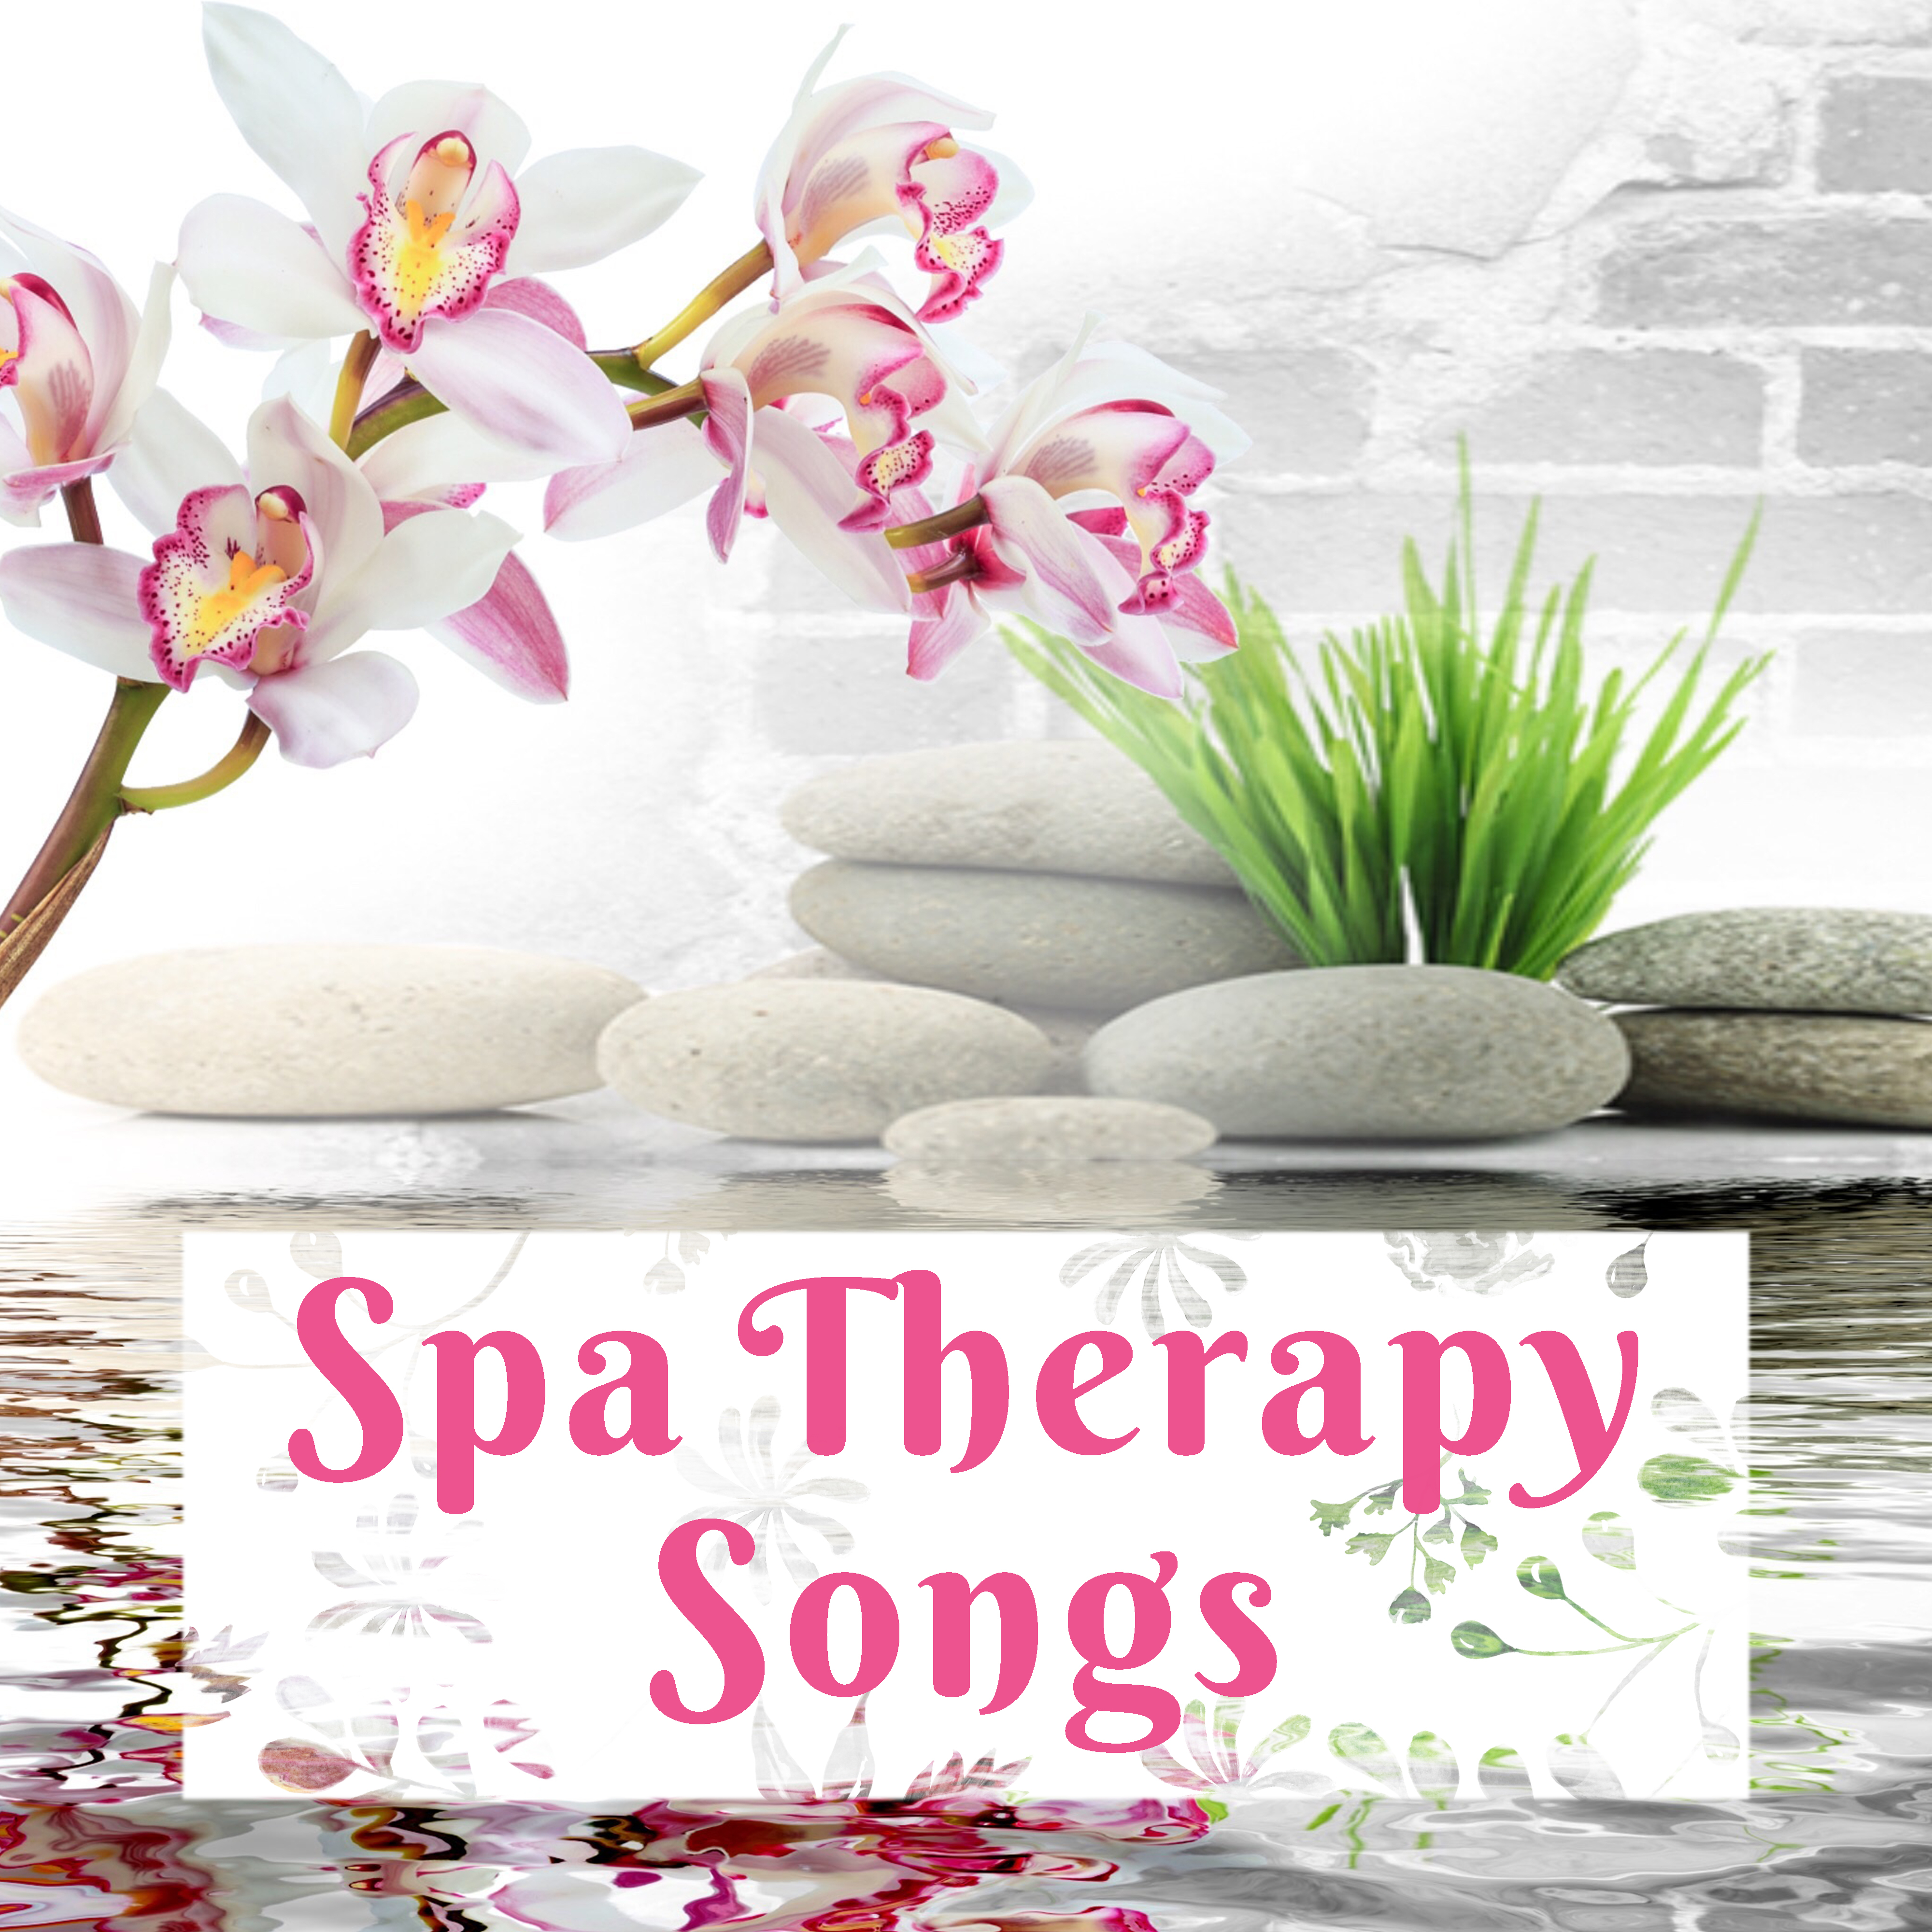 Spa Therapy Songs  Relaxing Music for Spa, Massage, Beauty Treatments, Rest